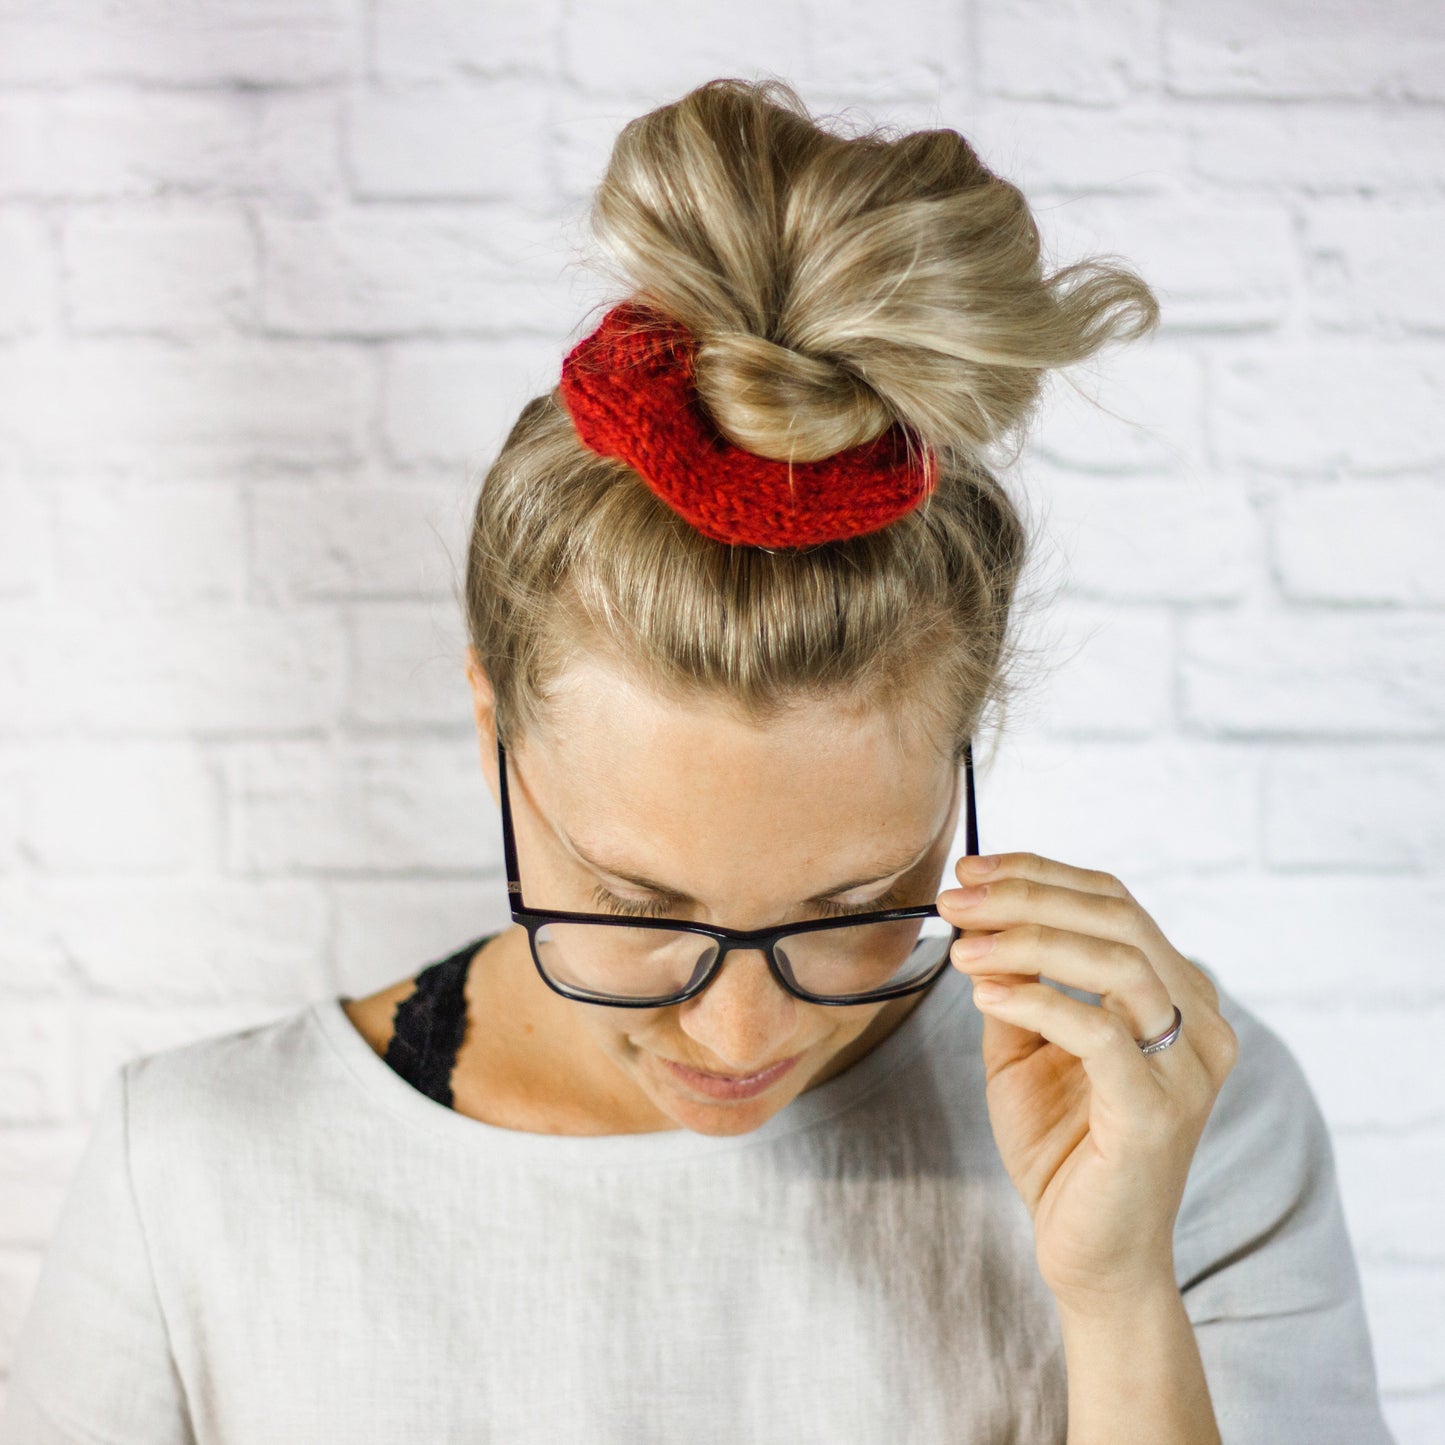 Women's Knitted Hair Scrunchies - Red